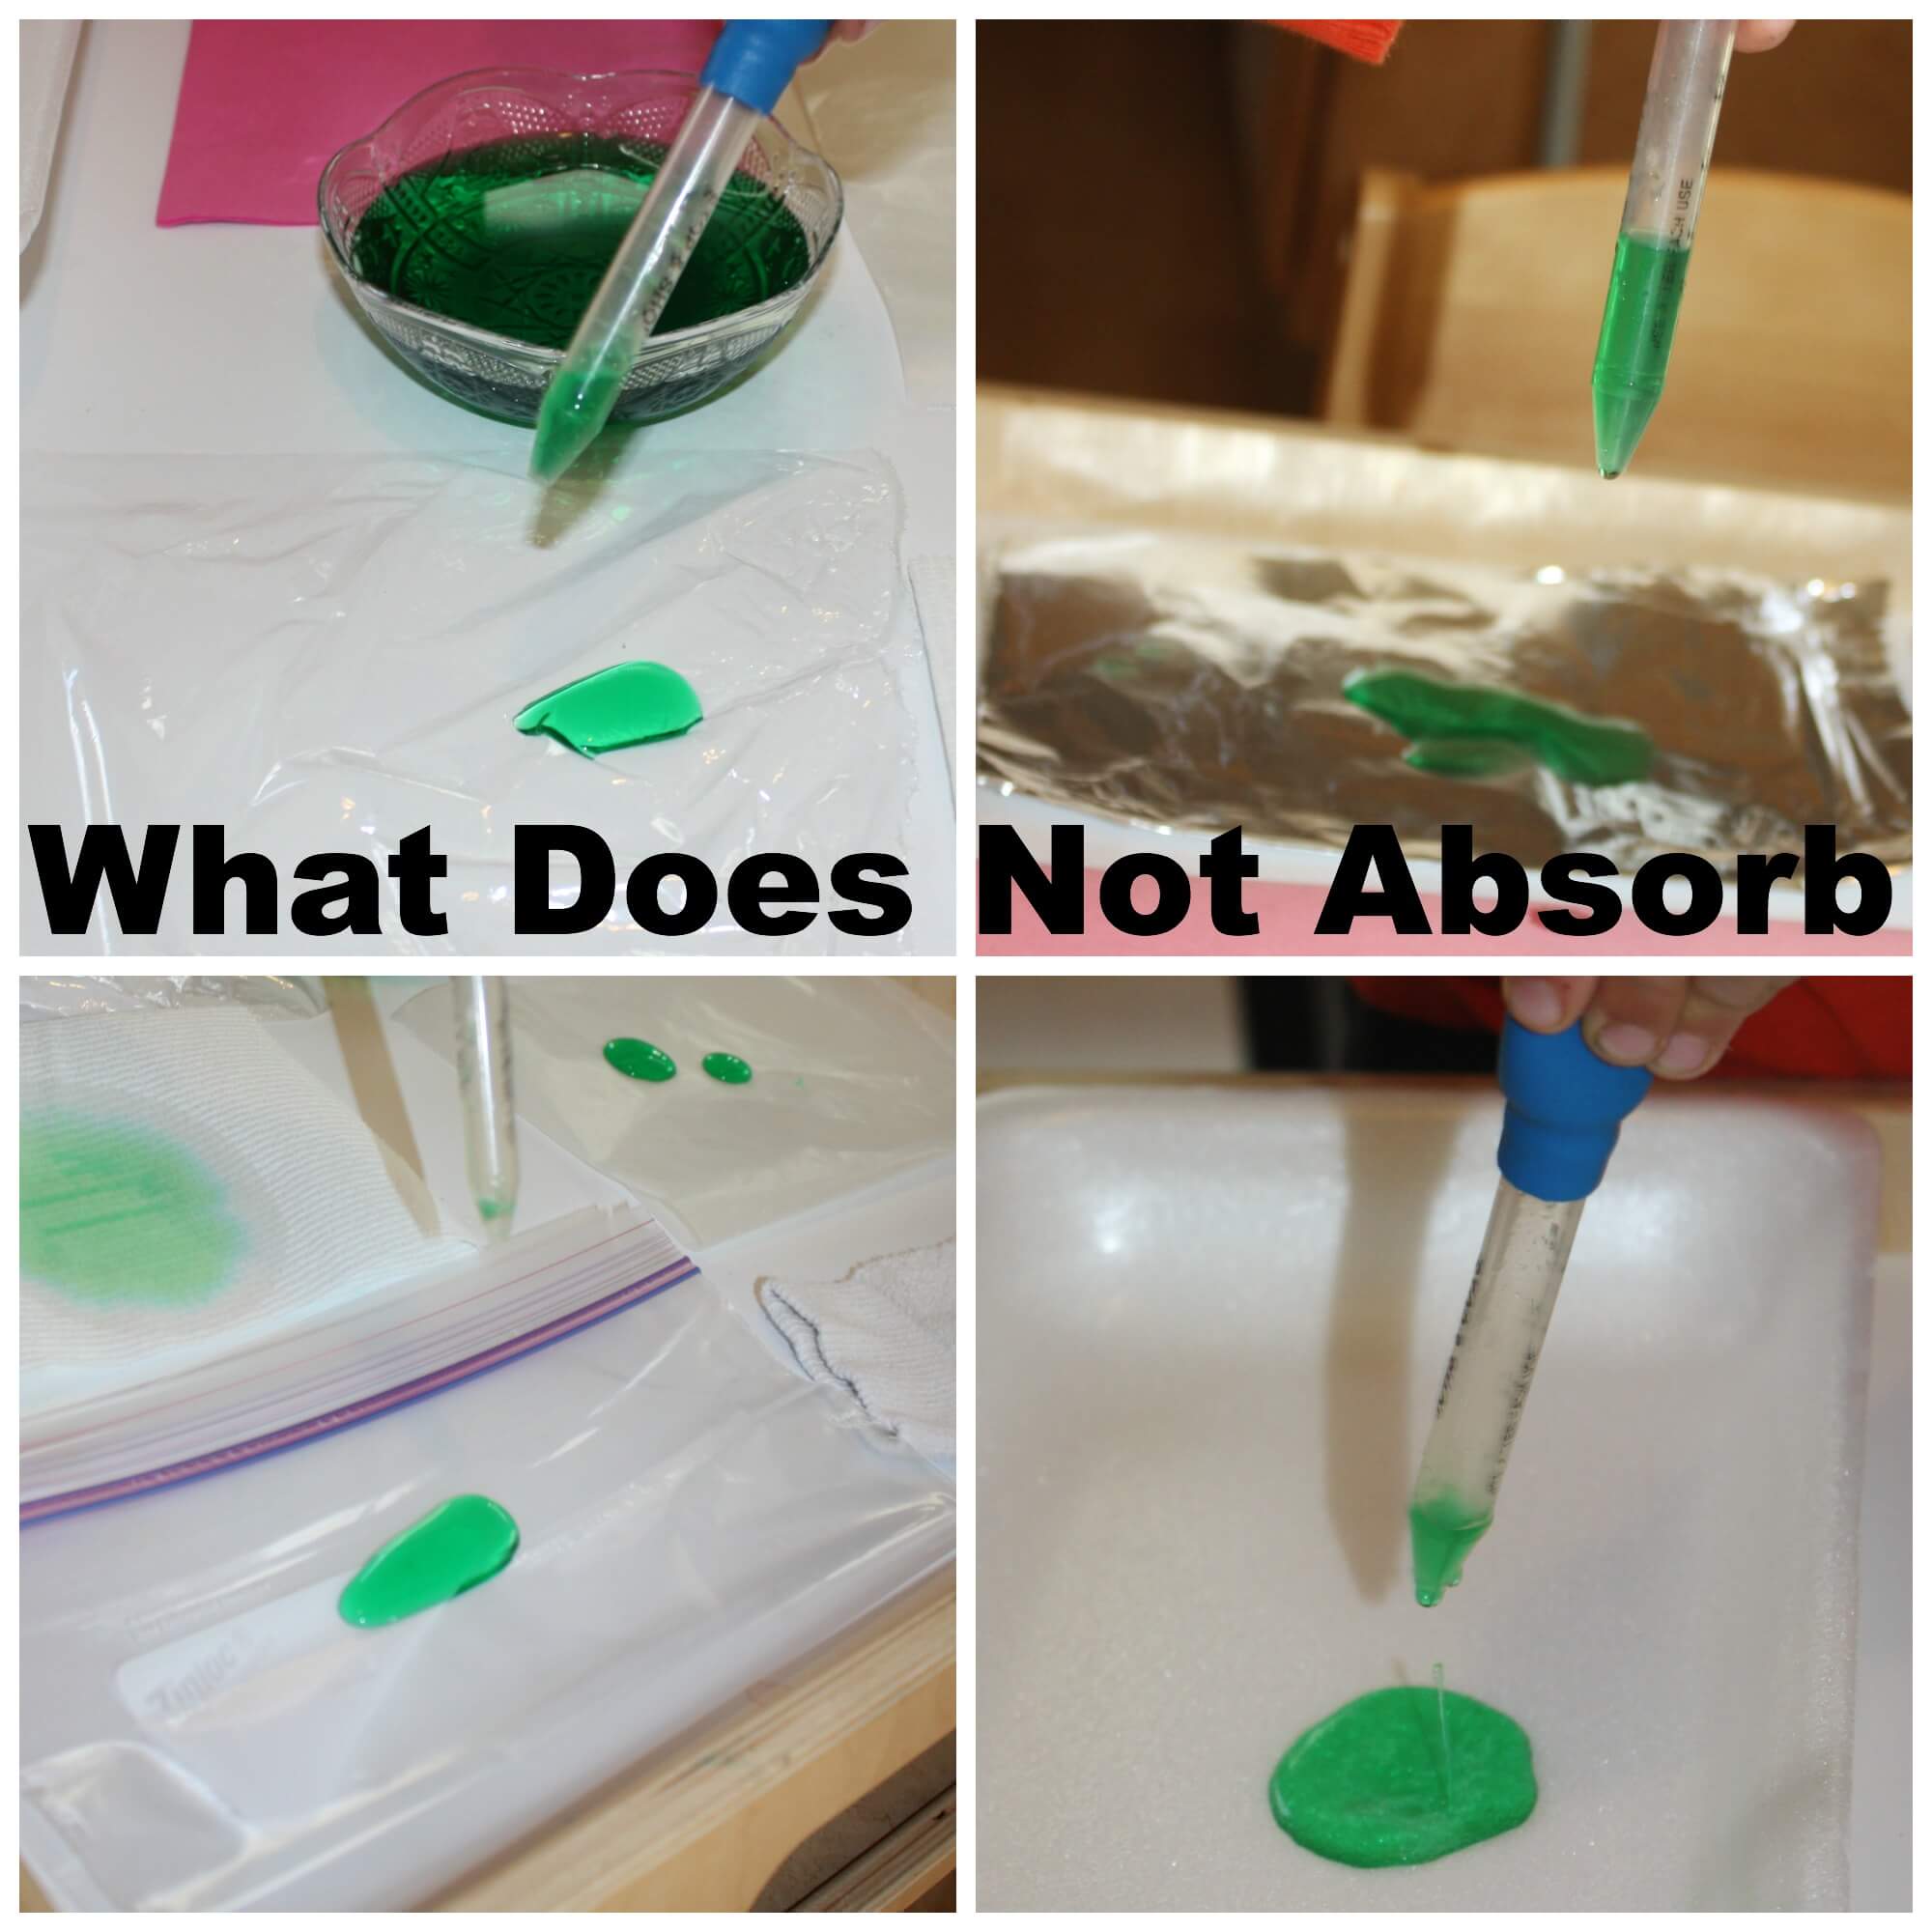 Which materials absorb the most water?